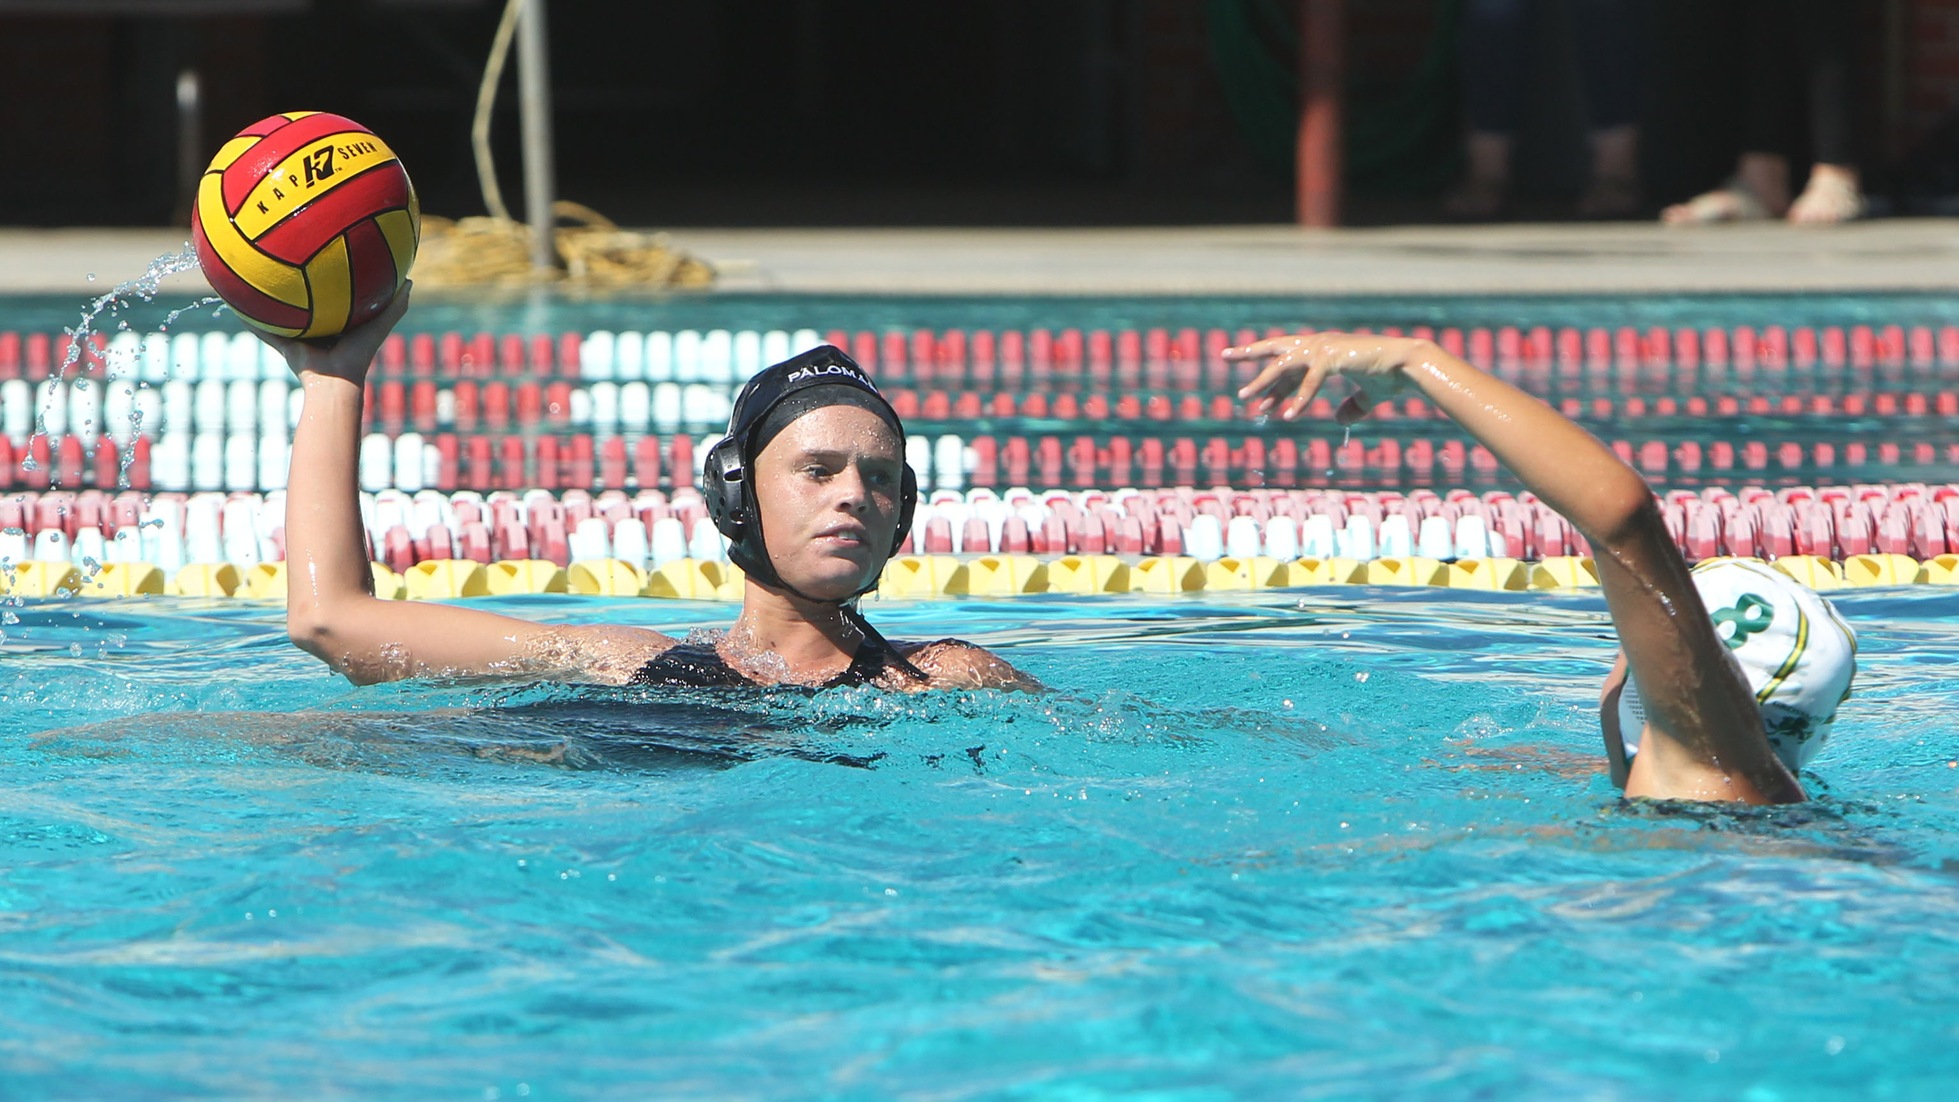 Emma Thomas gets ready to send her second goal into the net against Grossmont College on Wednesday afternoon at Wallace Memorial Pool. (Hugh Cox Photo)